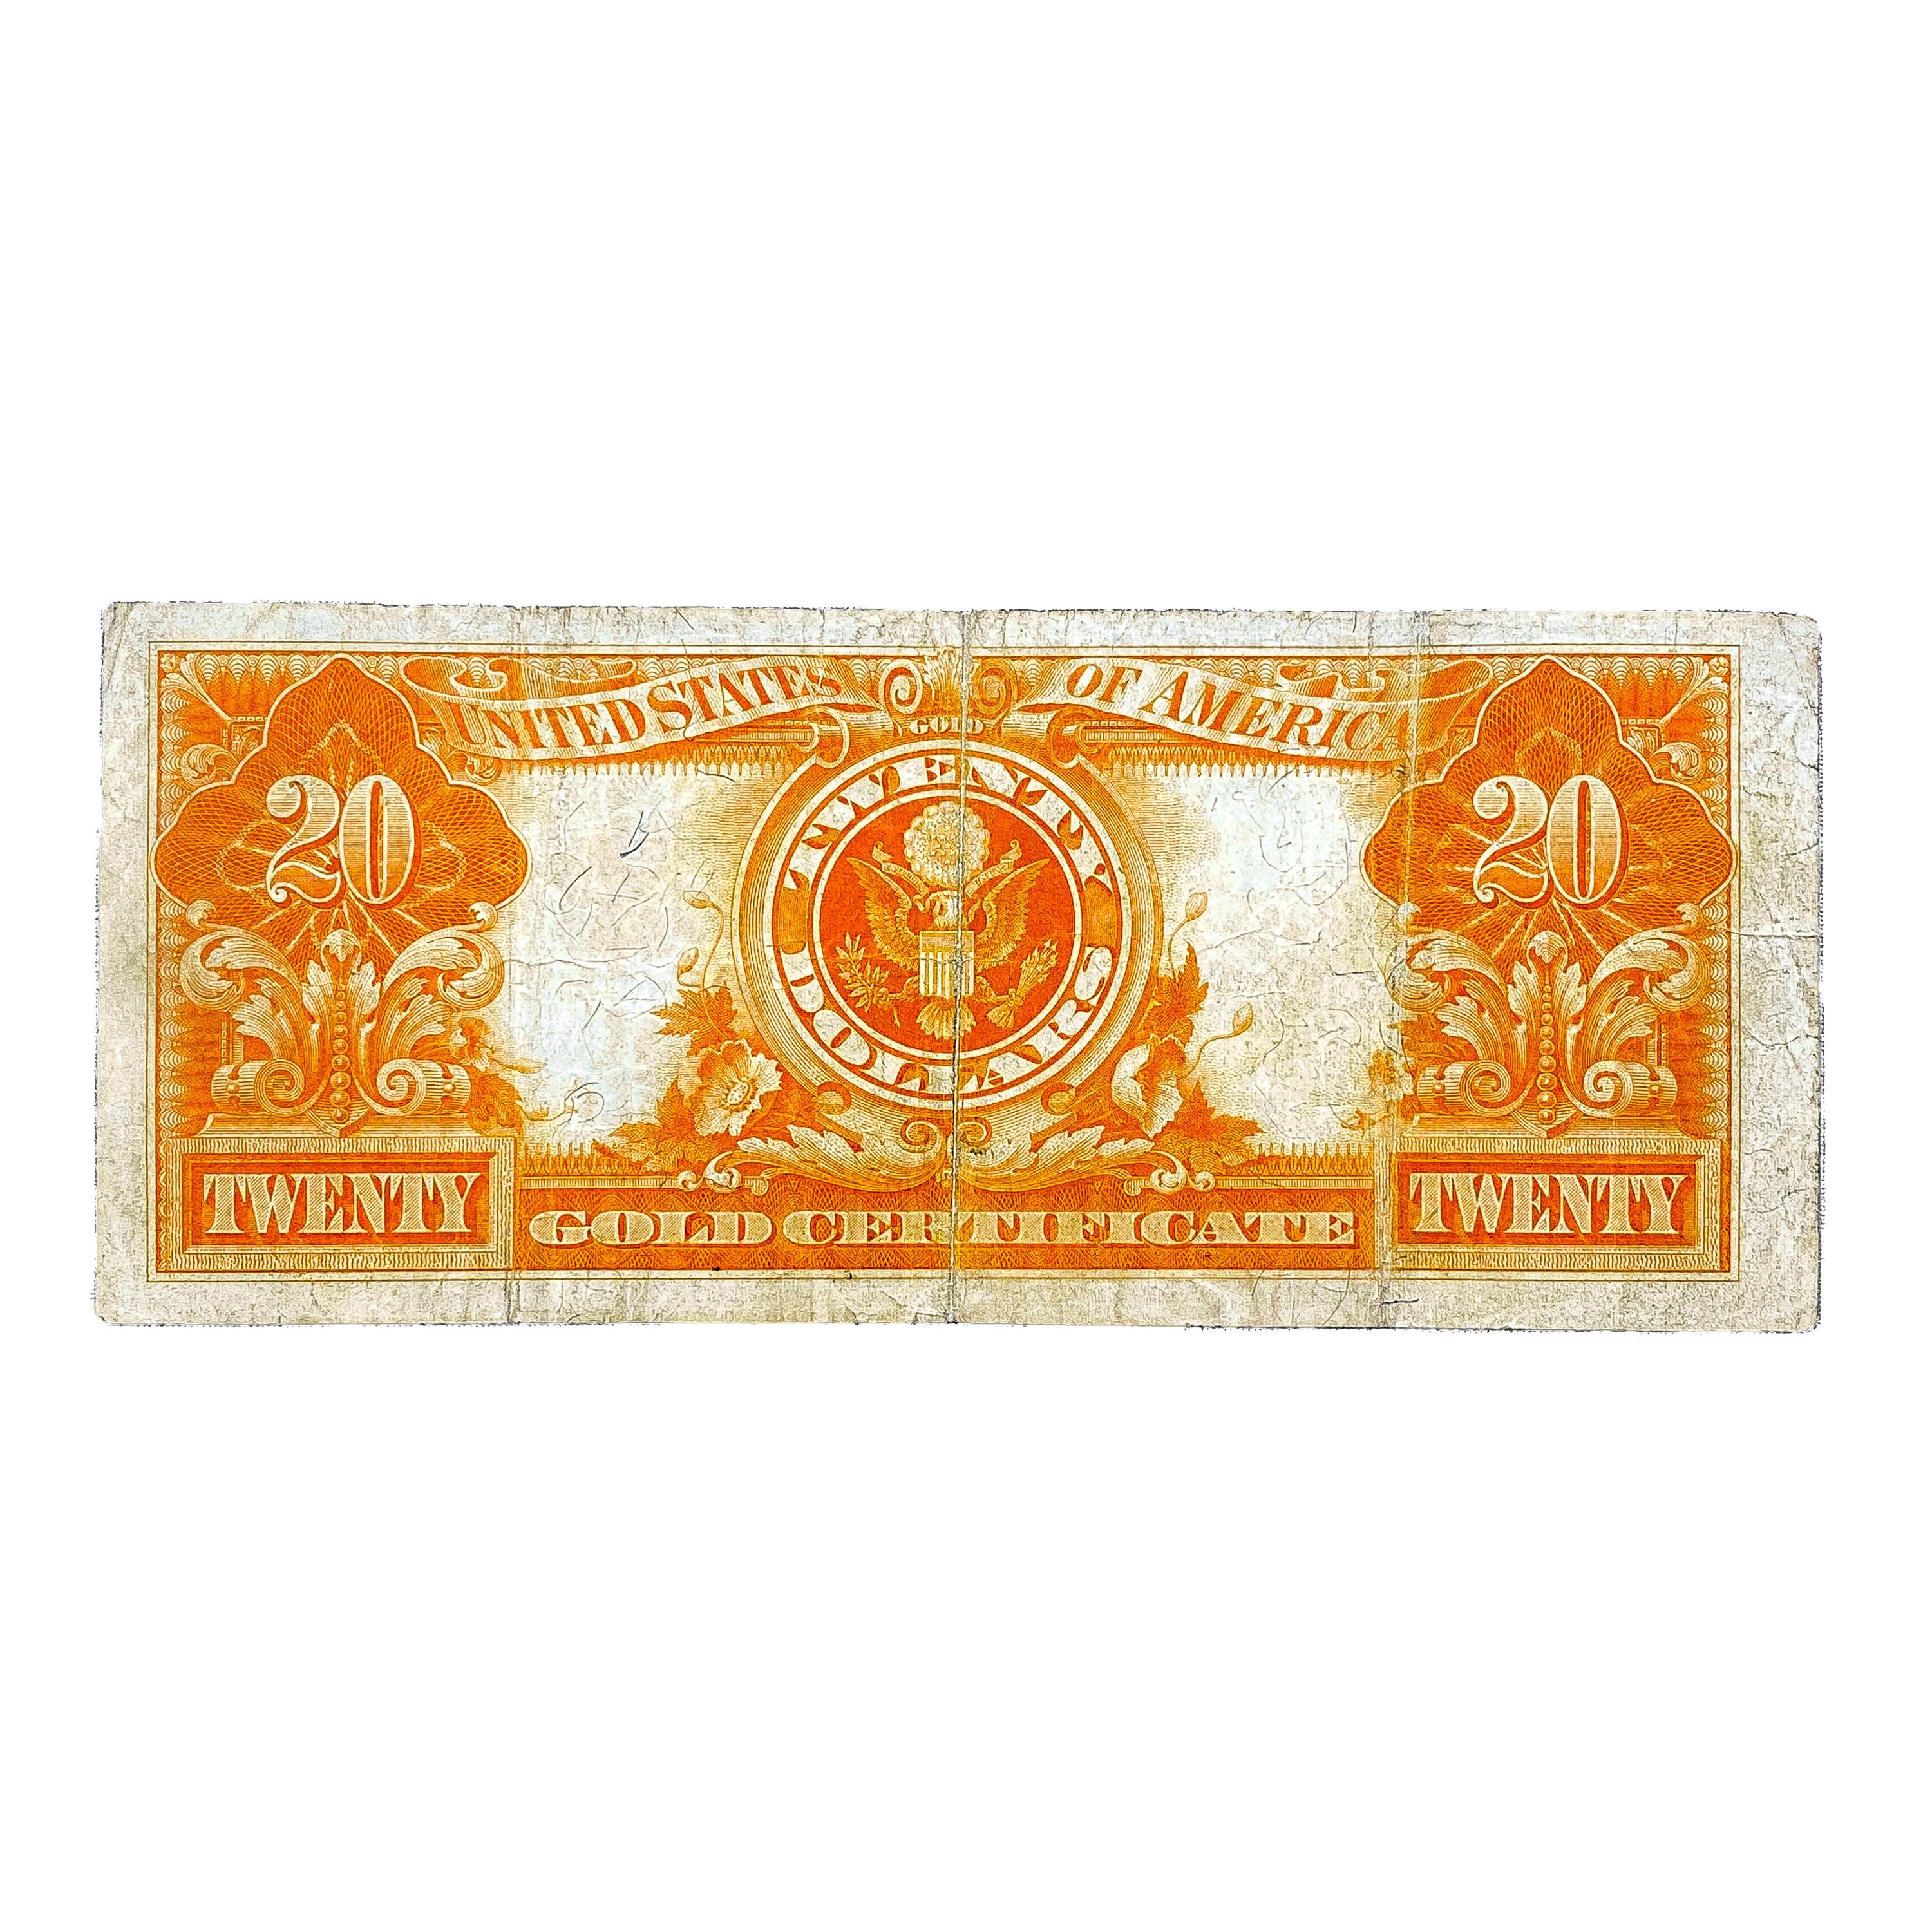 1922 $20 US Gold Certificate